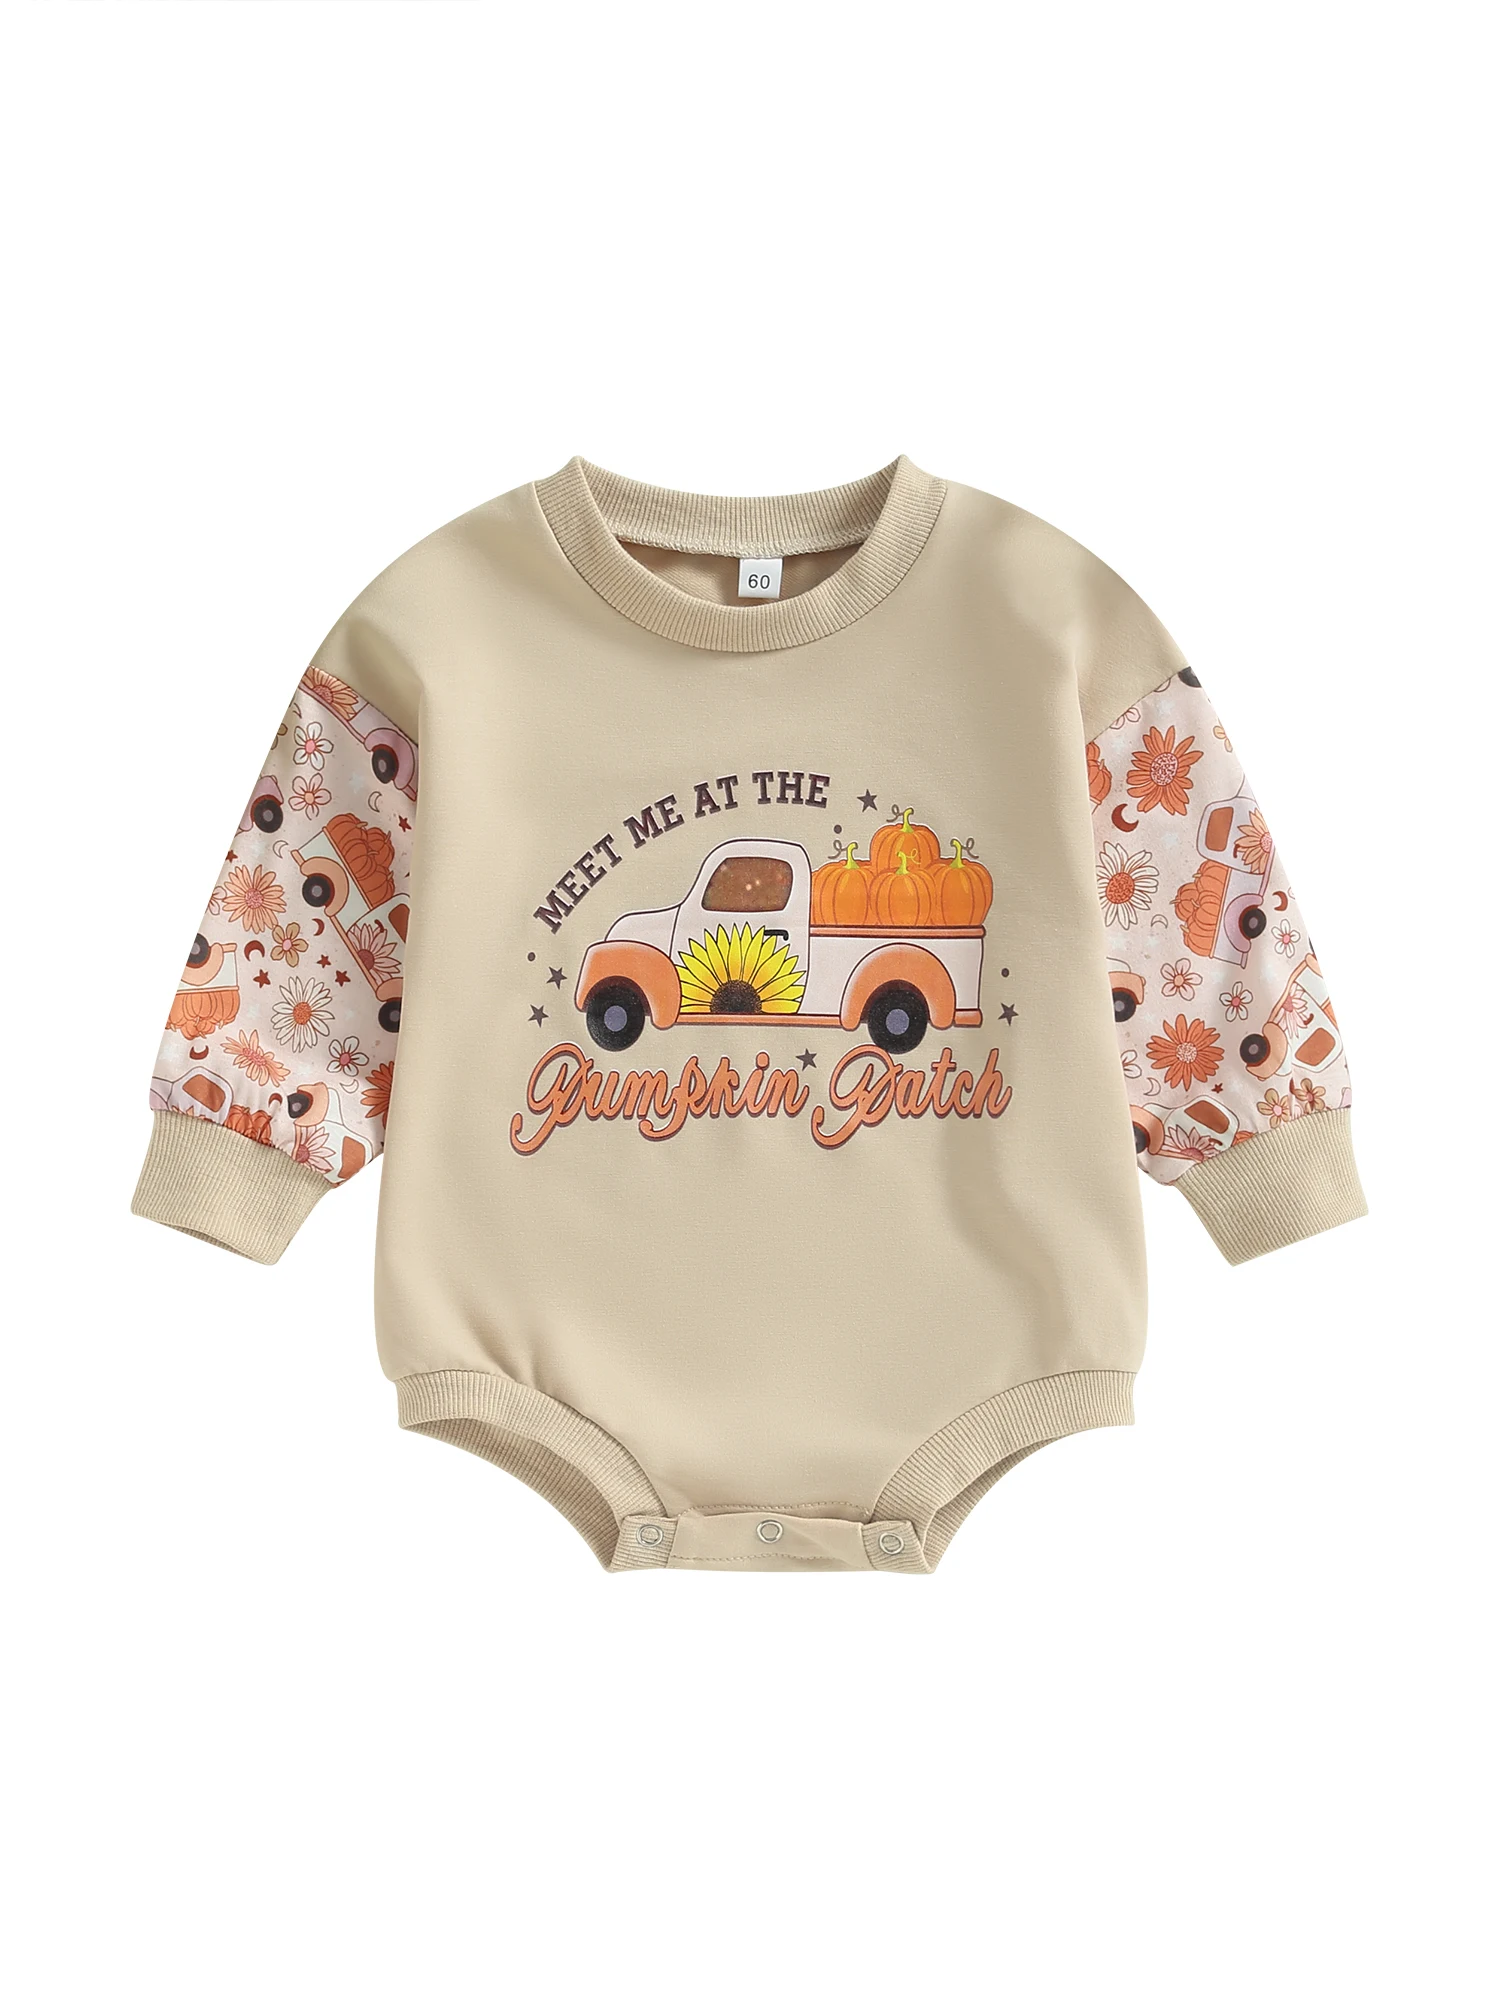 

Adorable Pumpkin-themed Halloween Costume for Newborn Baby Girls and Boys - Oversized Sweater and Sweatshirt Romper in